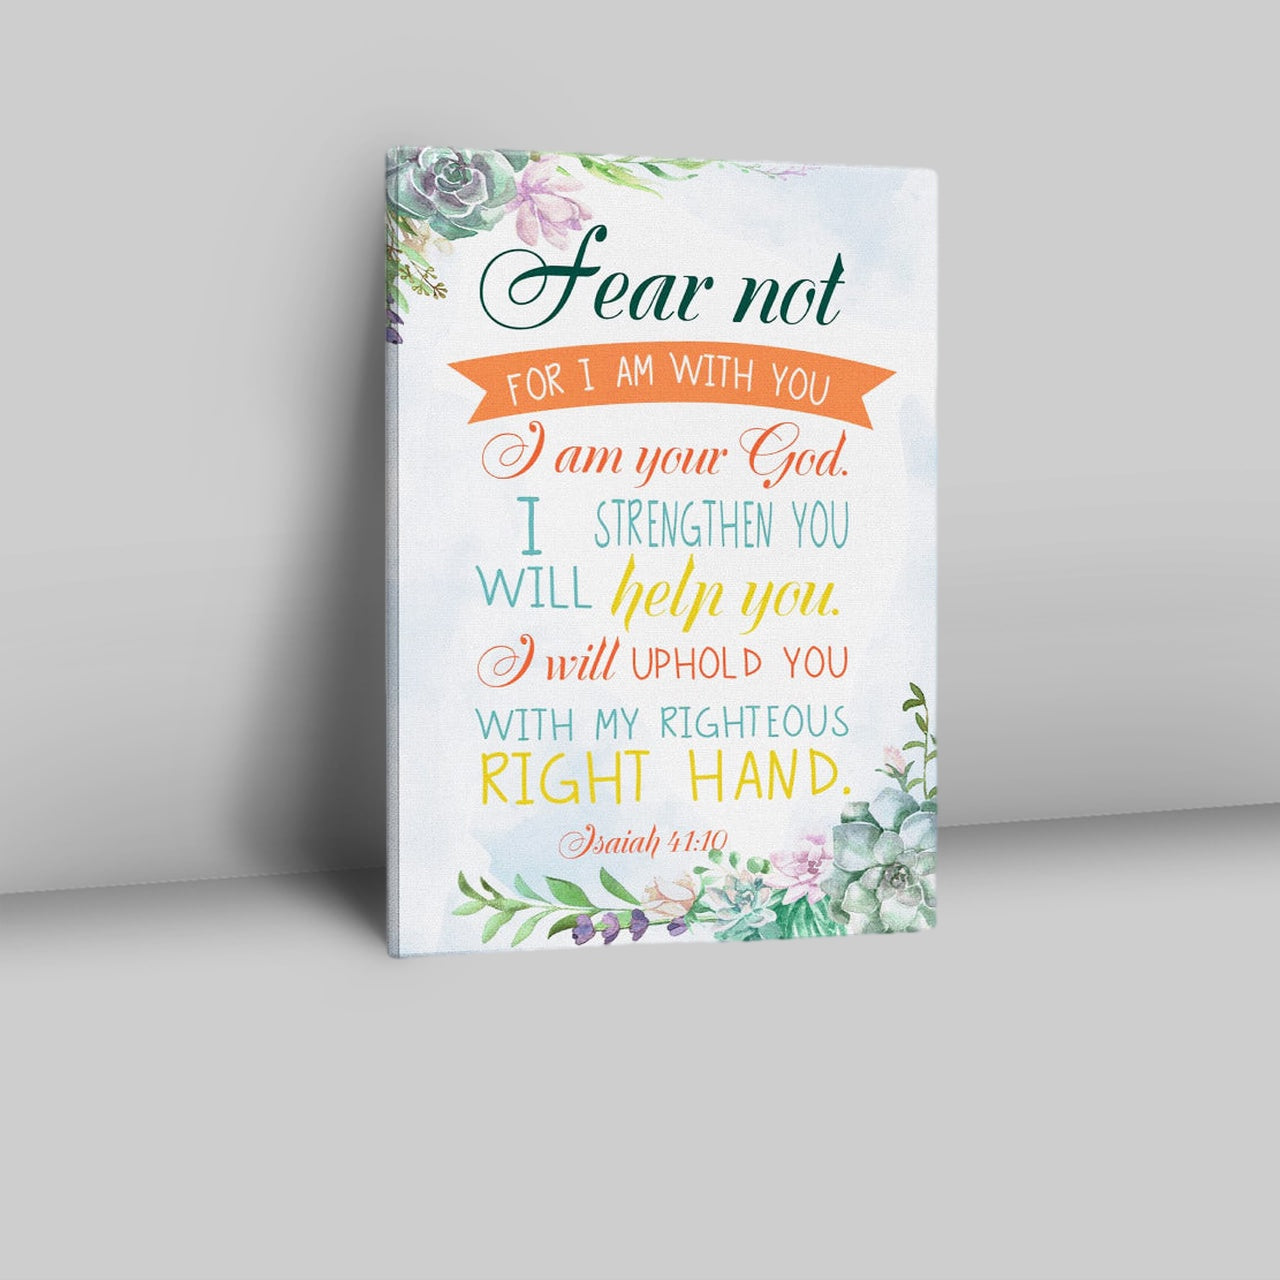 Fear Not For I Am With You Isaiah 4110 Bible Verse Wall Decor Art - Bible Verse Wall Decor - Scripture Wall Art